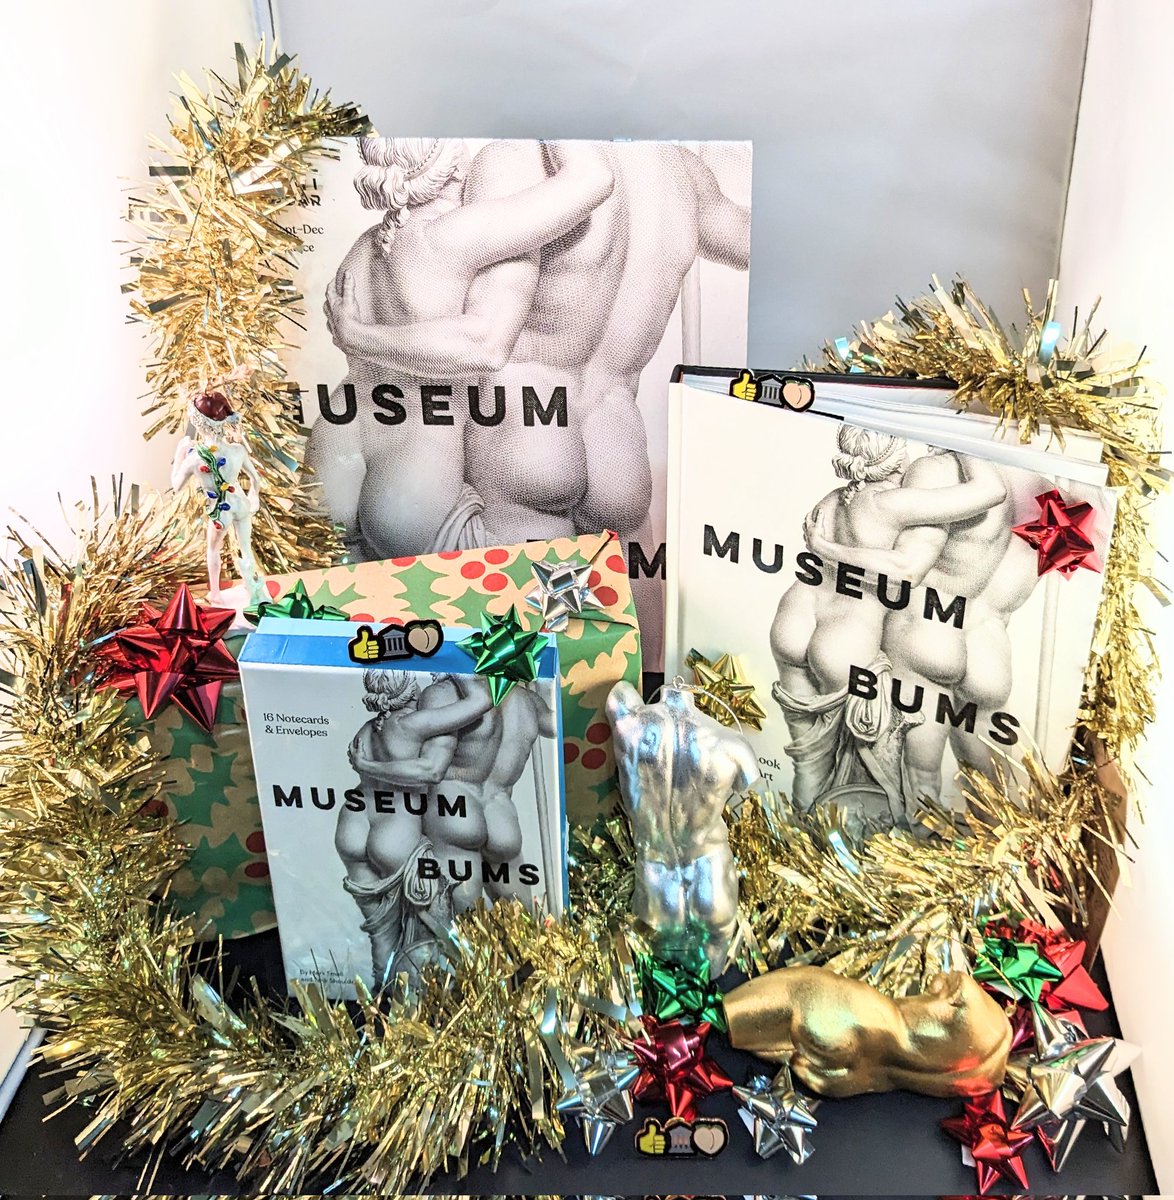 Win signed #MuseumBums goodies! 👍🏛️🍑

Like, follow, & tag a pal to enter (UK only)

1st prize: signed book, calendar, notecards & pinbadge
2nd prize: signed book, calendar & pinbadge
3rd prize: signed calendar & pinbadge

Winners selected at random & announced 11/12/23!